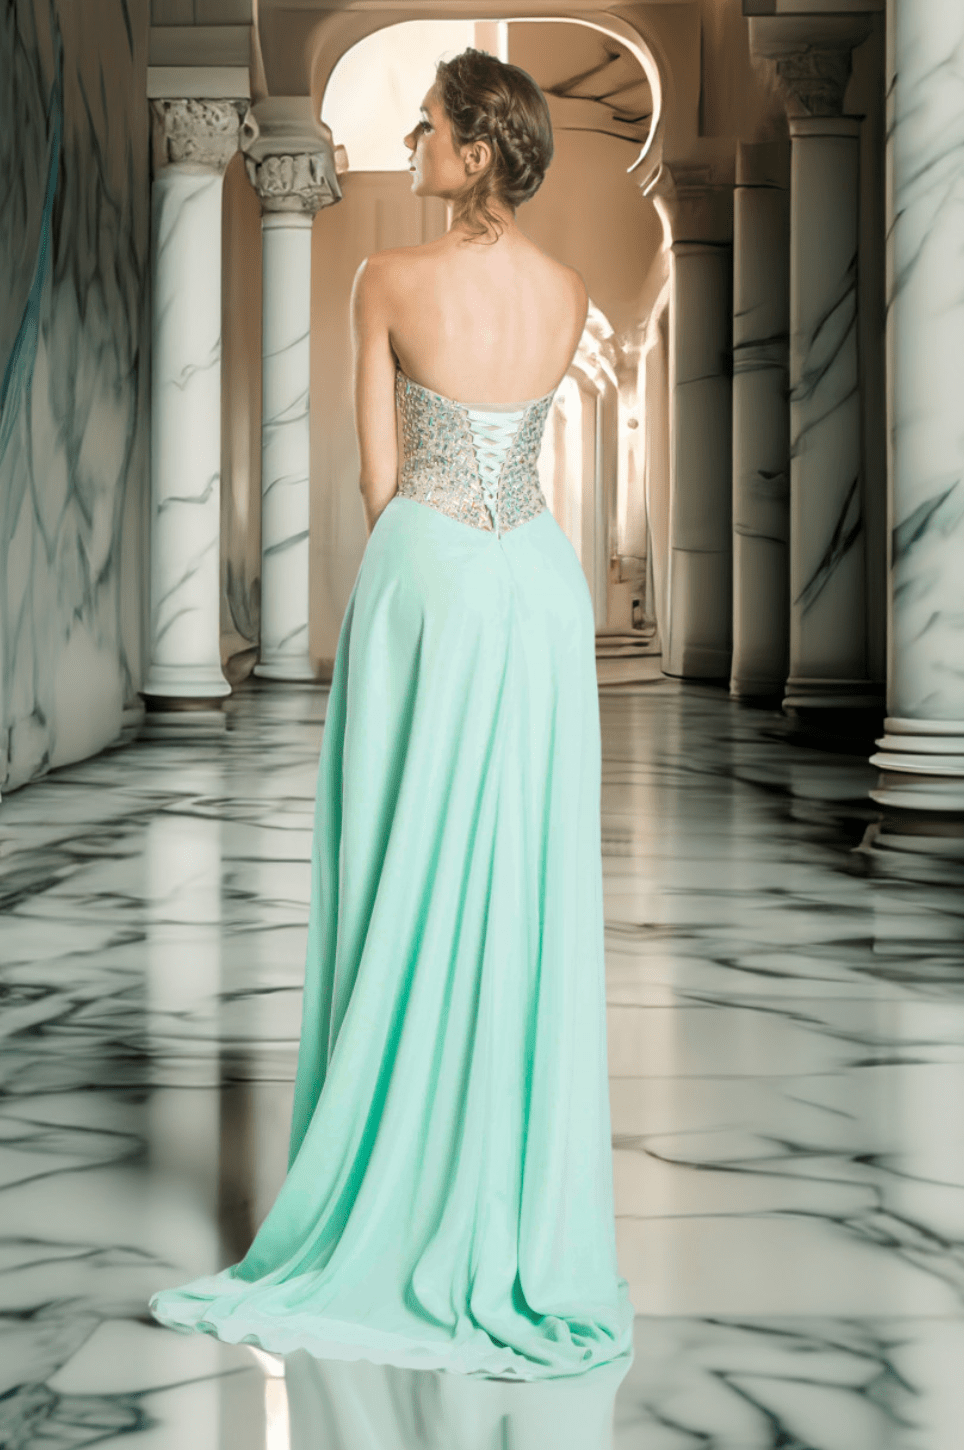 Sparkling Strapless Leg Slit Dress by Aspeed - NORMA REED